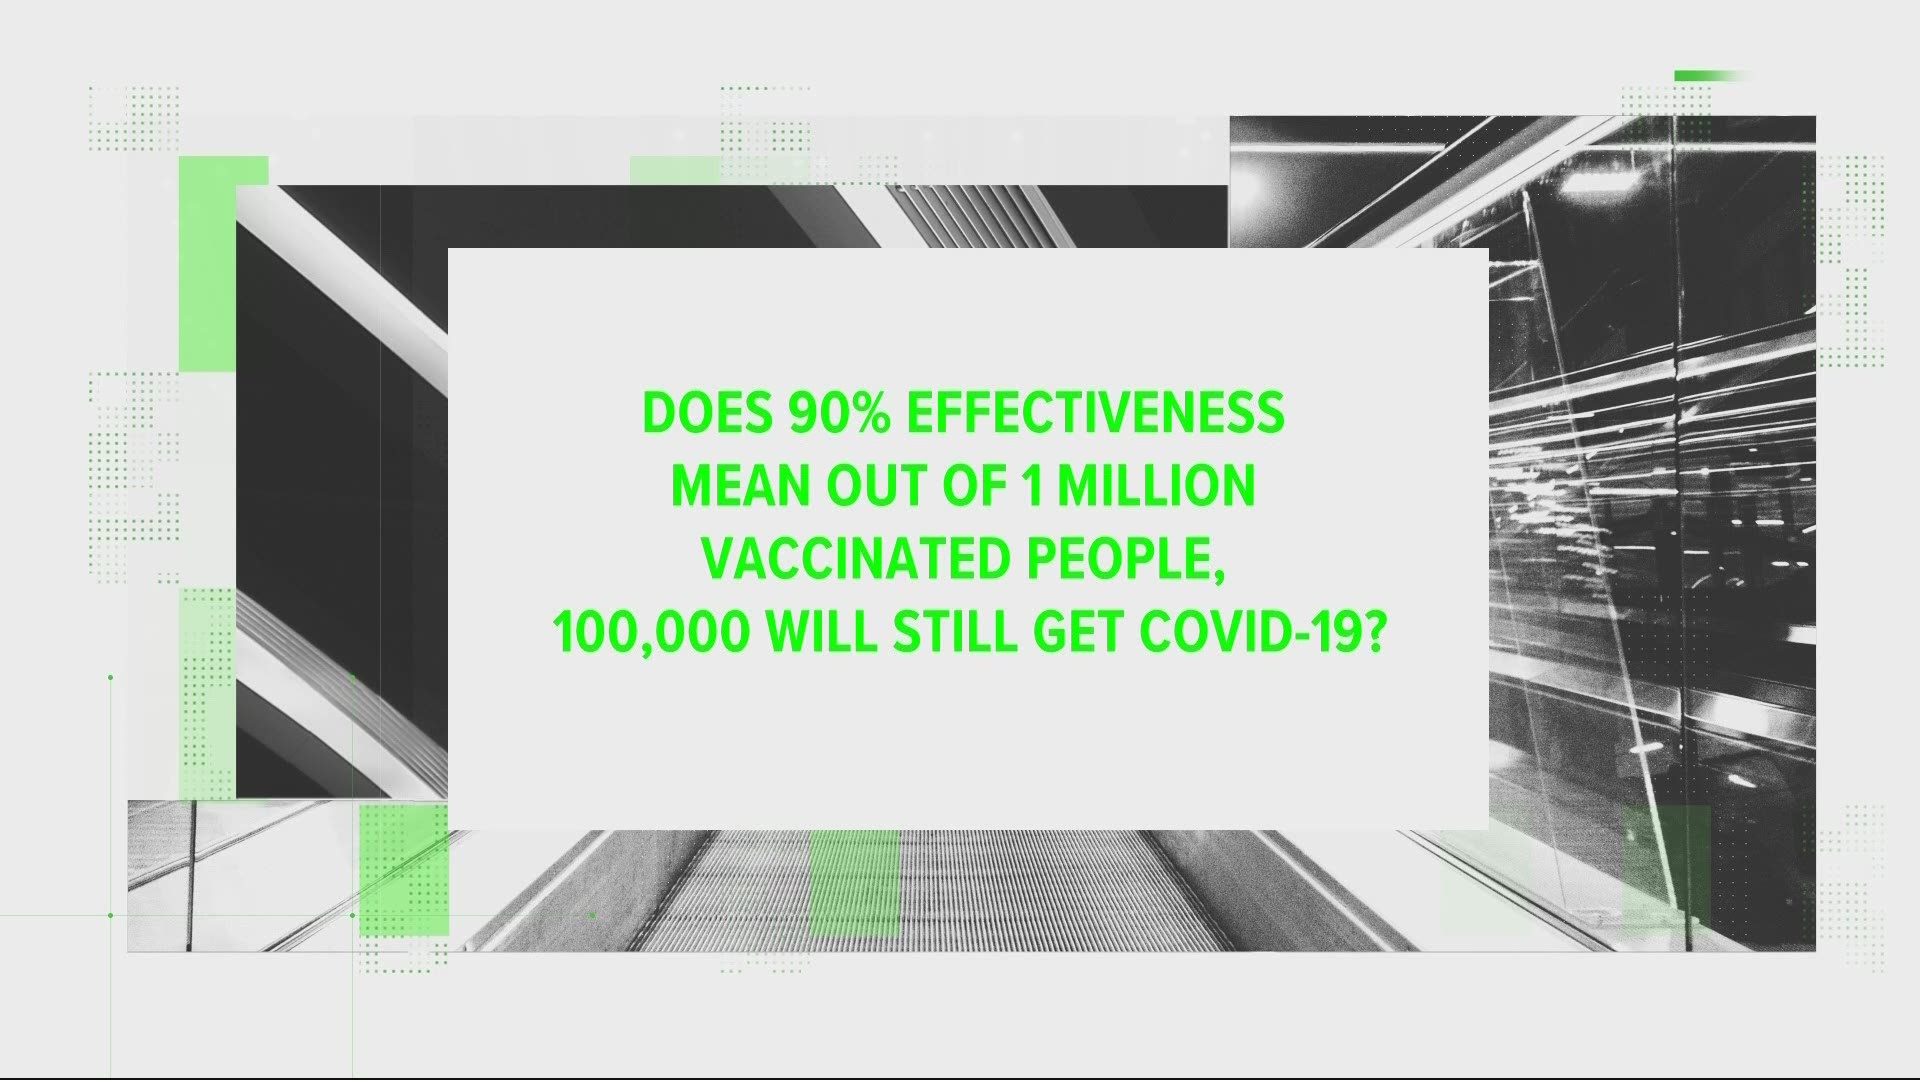 First, we need to define "effectiveness", the CDC says it's a measure of how much a vaccine reduces disease risk compered to an unvaccinated group